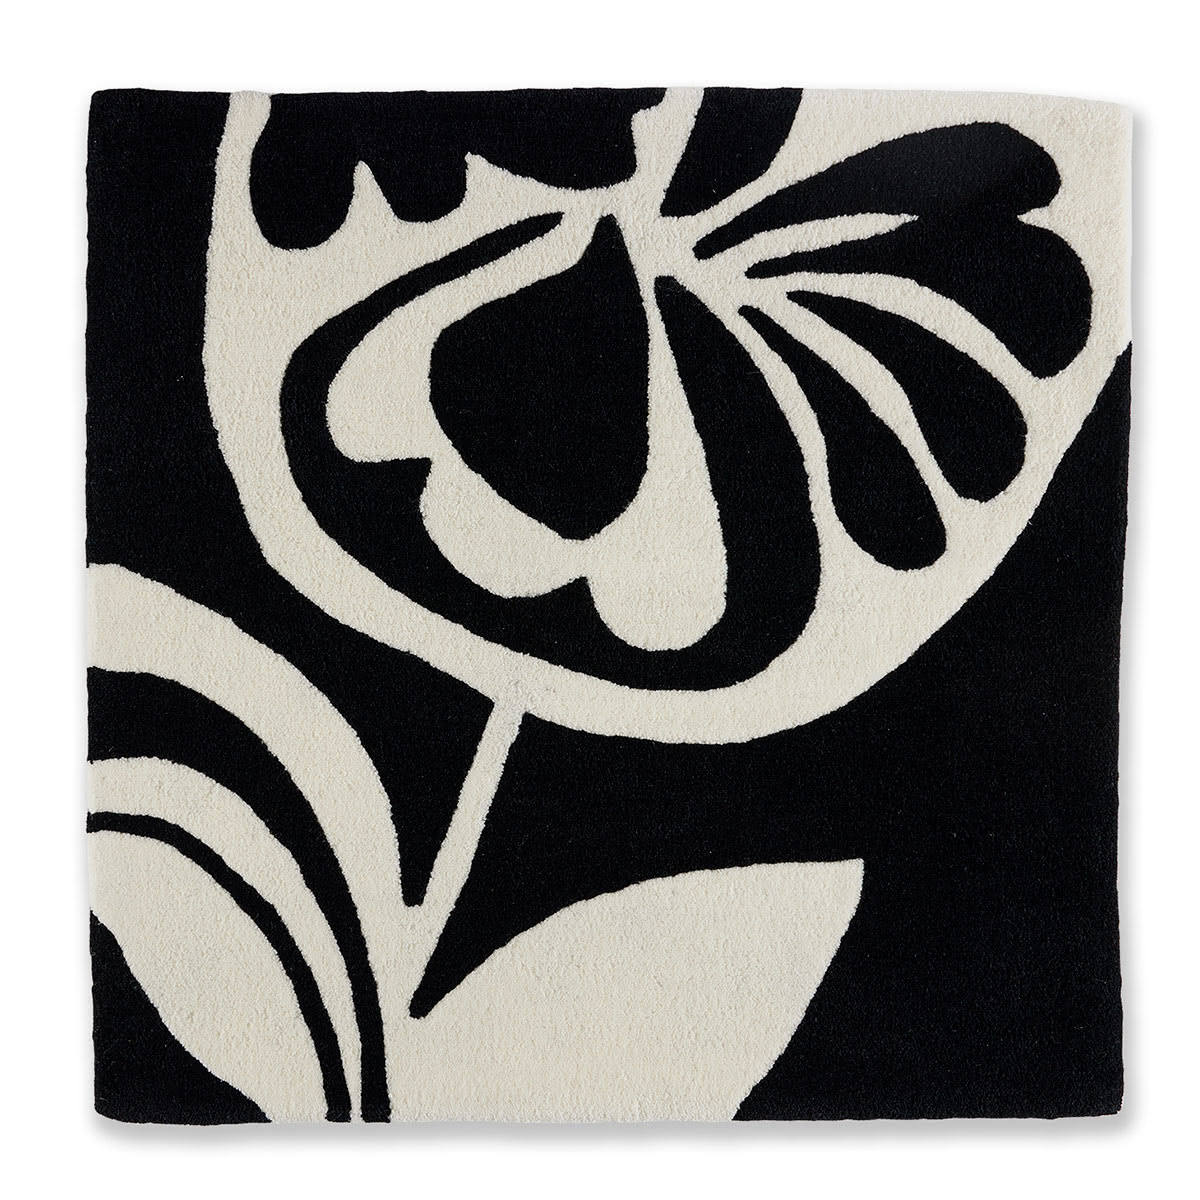 An abstract black and white flower pattern on a square rug.